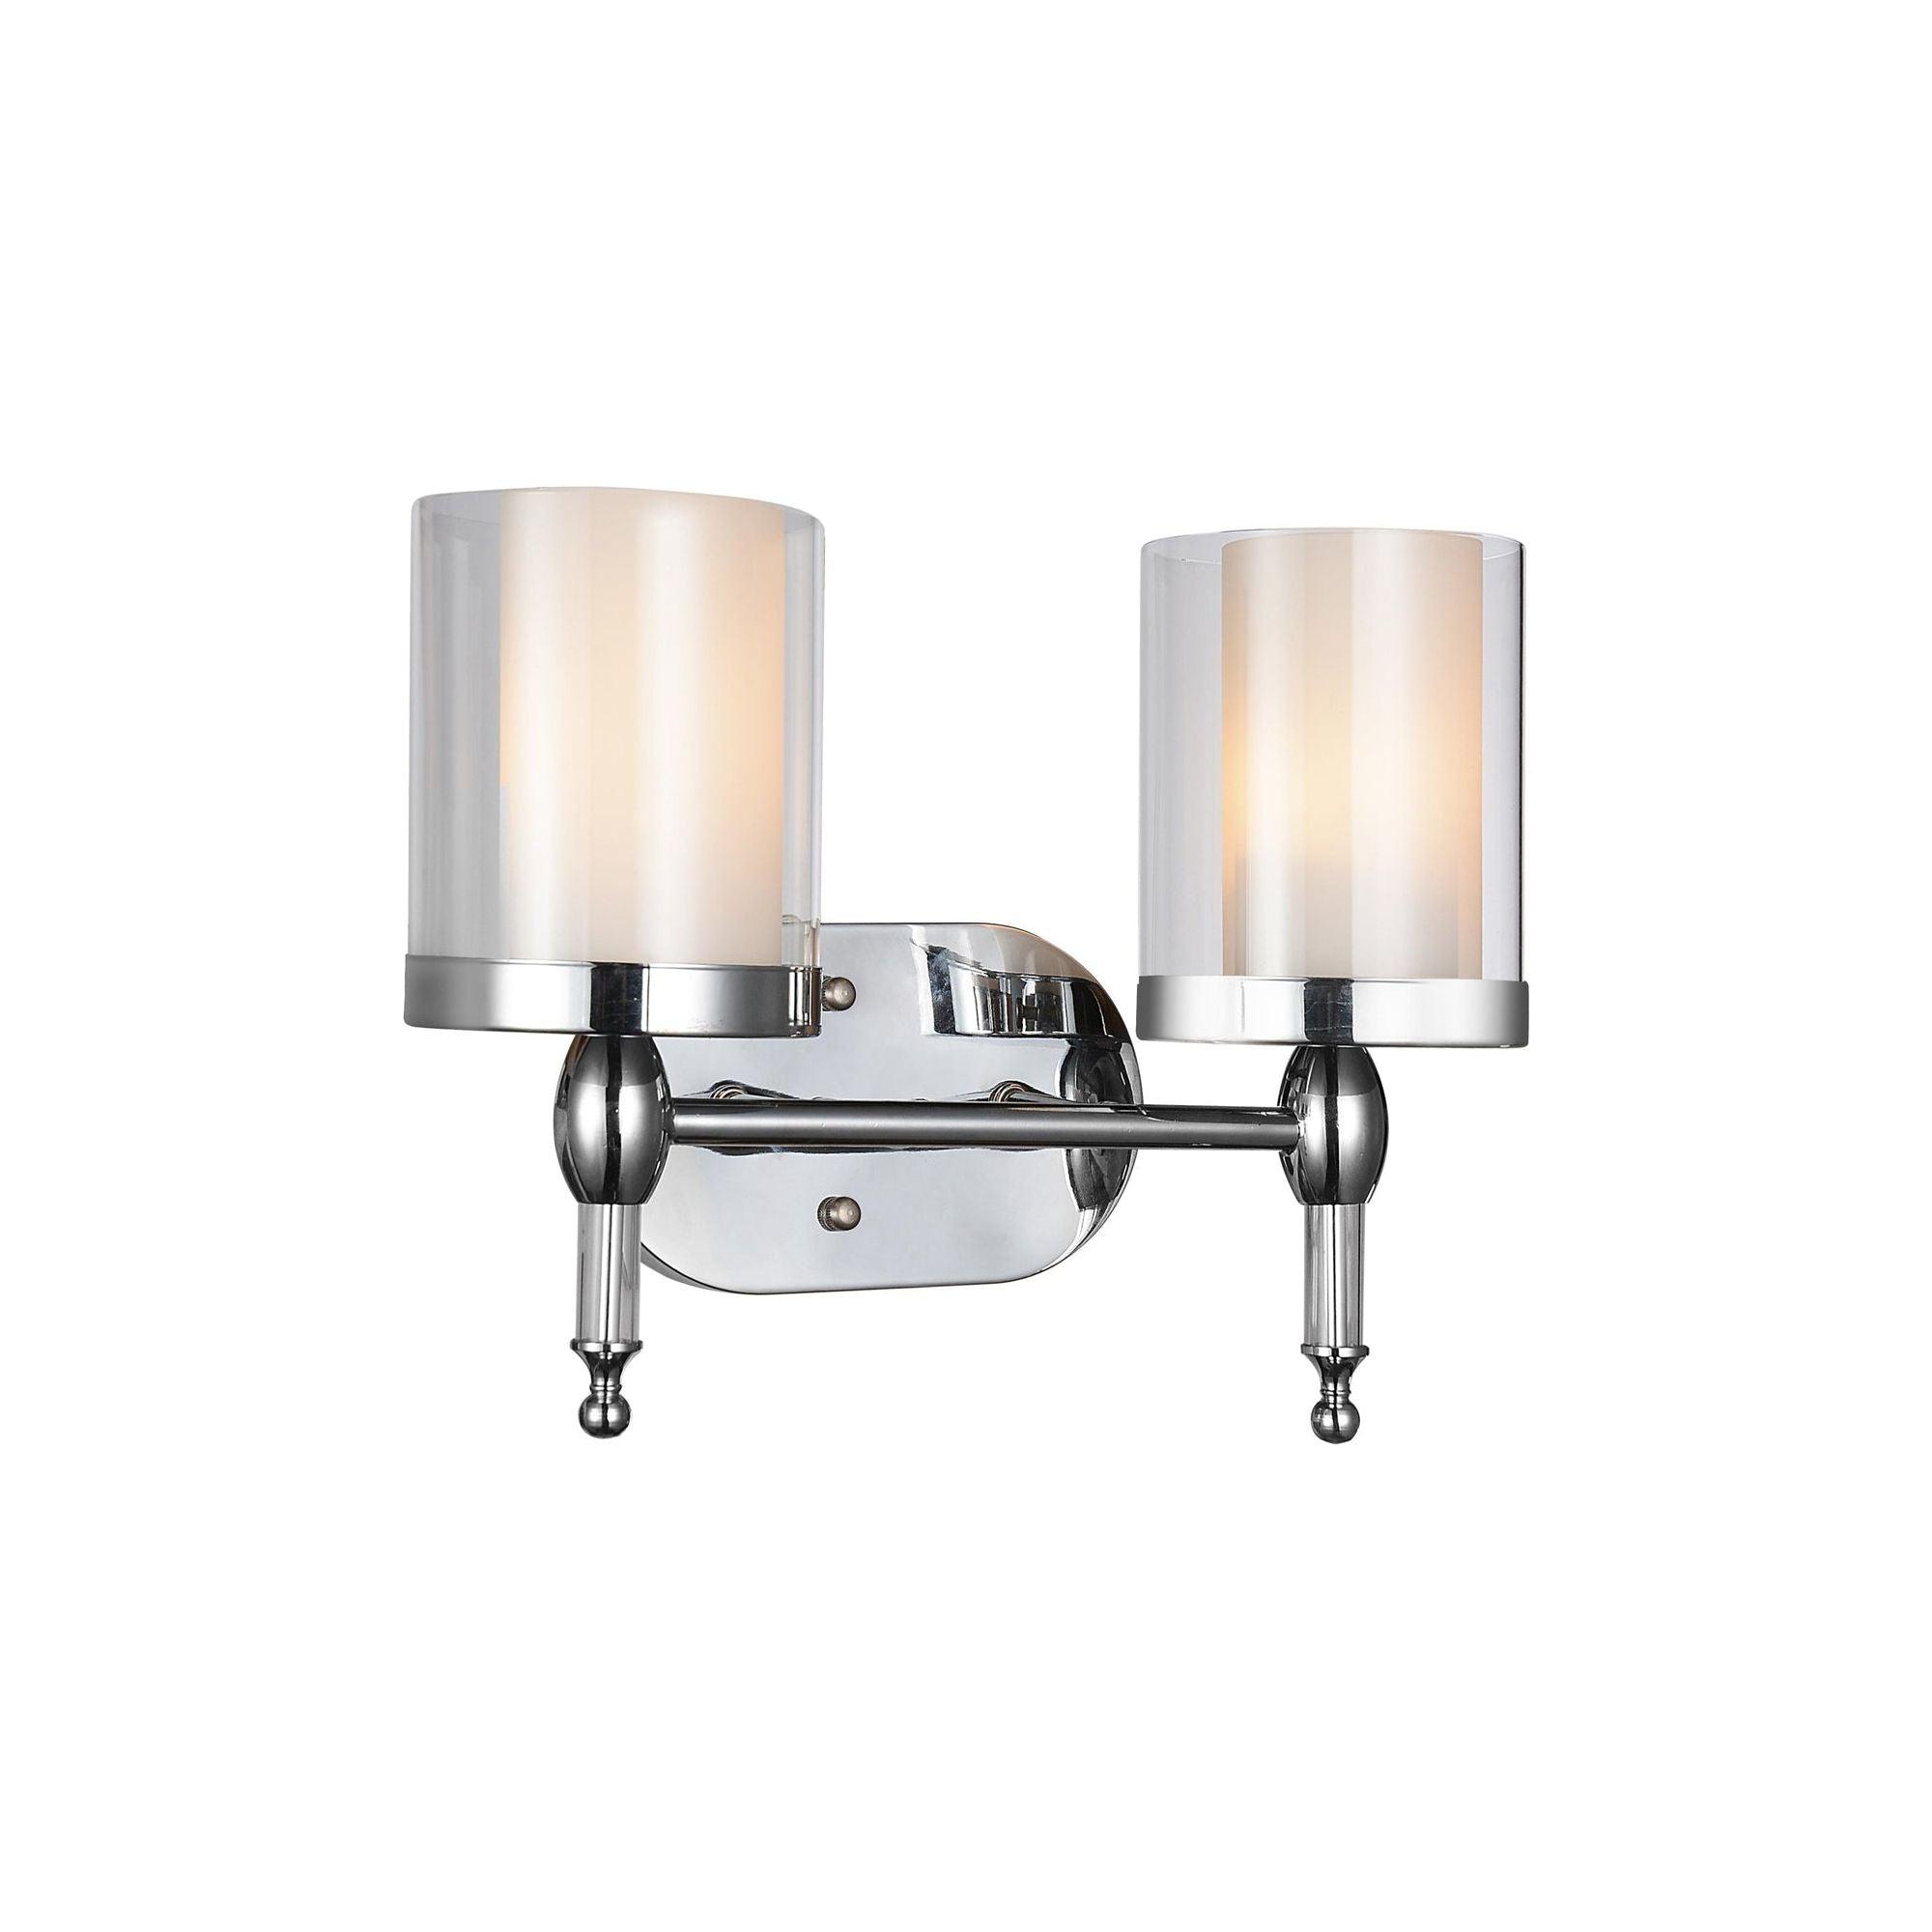 CWI - Maybelle Vanity Light - Lights Canada